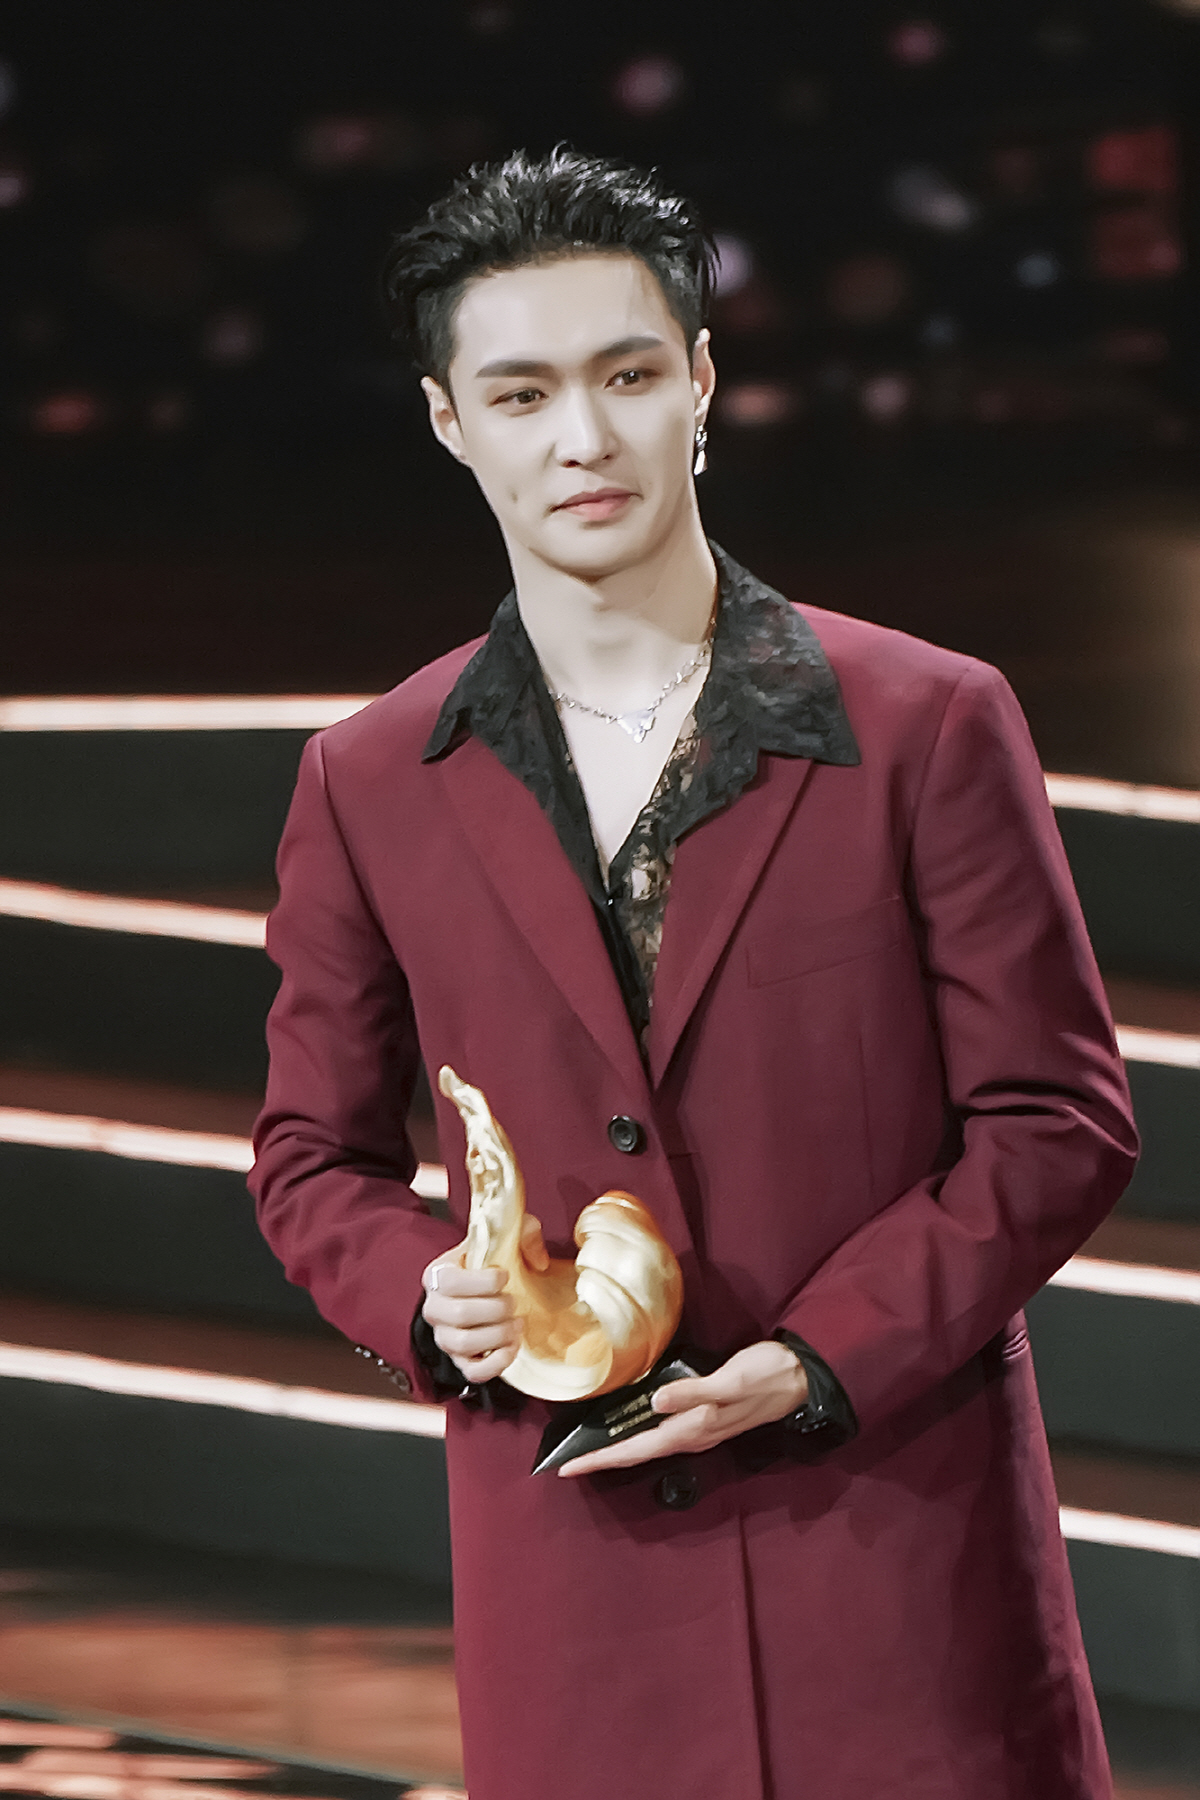 EXO Lay (a member of SM Entertainment) has swept up various awards ceremonies in China in the new year and is a hot topic.Lay attended the 2019 Weibo Night (2019) held at the Beijing Water Cube on January 11 (local time), won the Best Producer of the Year award and the Nam Shin of the Year award, making him a two-time winner, once again realizing his overwhelming local popularity.The 10th annual 2019 Weibo Night is an awards ceremony hosted by Chinas largest SNS Weibo. During the year, Weibo will be invited to the star star. Lay will be selected as a winner in recognition of his outstanding production skills, visuals, popularity and topics through various activities in 2019.In addition, Lay received the All-Star of the Year award at the 2019 ByteDance Years Exhibition (2019) held at the Beijing Cadillac Arena on January 8 (local time), and the ending stage was spectacularly decorated with the hit song NAMANANA (namana), which received a warm response from more than 5,000 viewers who visited the scene.The awards ceremony will feature ByteDance, which is serving video-sharing application TikTok, and news application Ginrtouo (????????), and based on Big Data in the ByteDance platform, it selected excellent people and contents that showed outstanding performance in the popular culture industry.As a result, Lay was held in December last year 2019 Tencent Music Entertainment Awards three-time king, 2020 Aichi Night of the Shout, followed by 2019 Weibo Night 2 and 2019 ByteDance Yeonl City, won a total of 8 awards at the China end of the year ceremony, proving explosive popularity and high status in the local area.